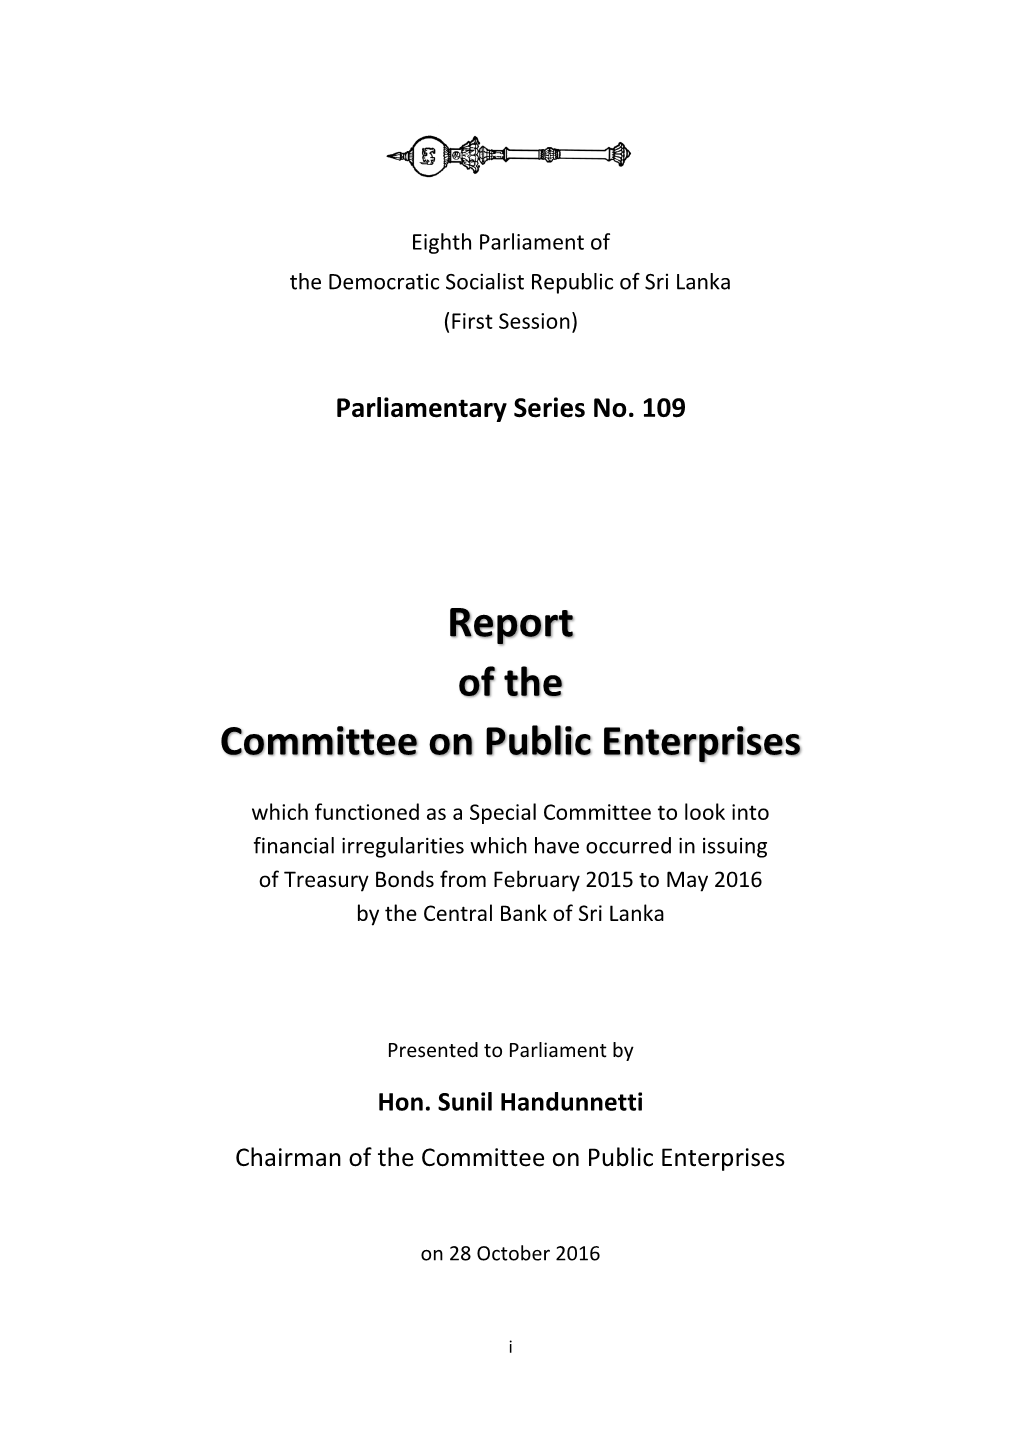 Report of the Committee on Public Enterprises